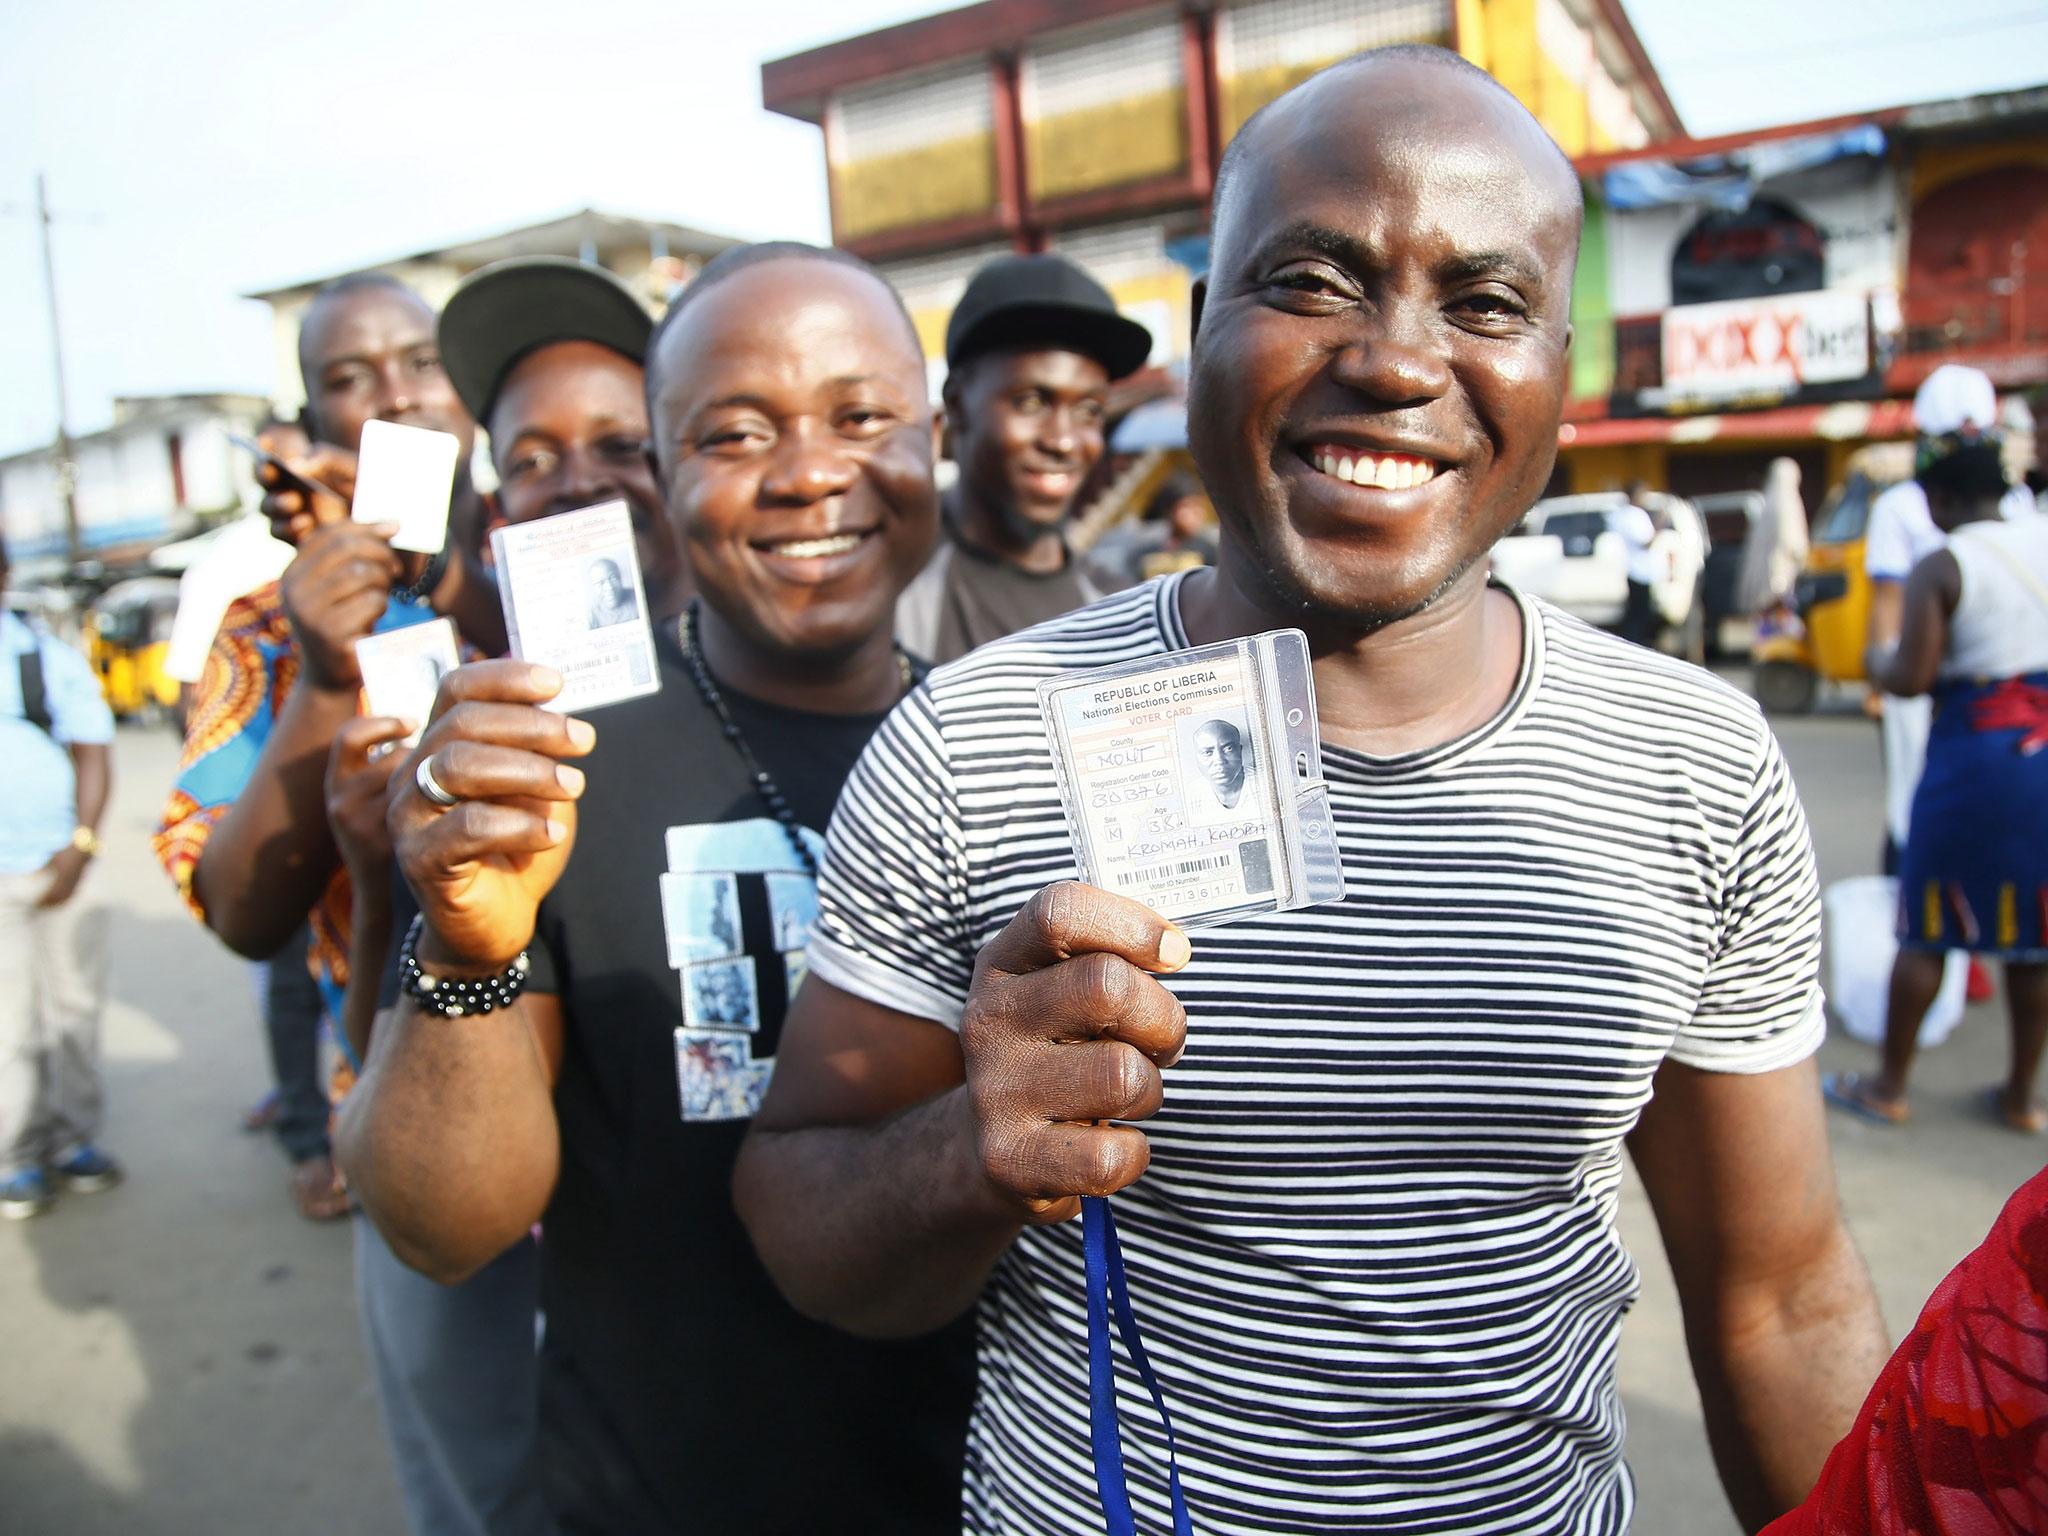 Liberians display voter cards during the presidential and general election in West Point, Monrovia